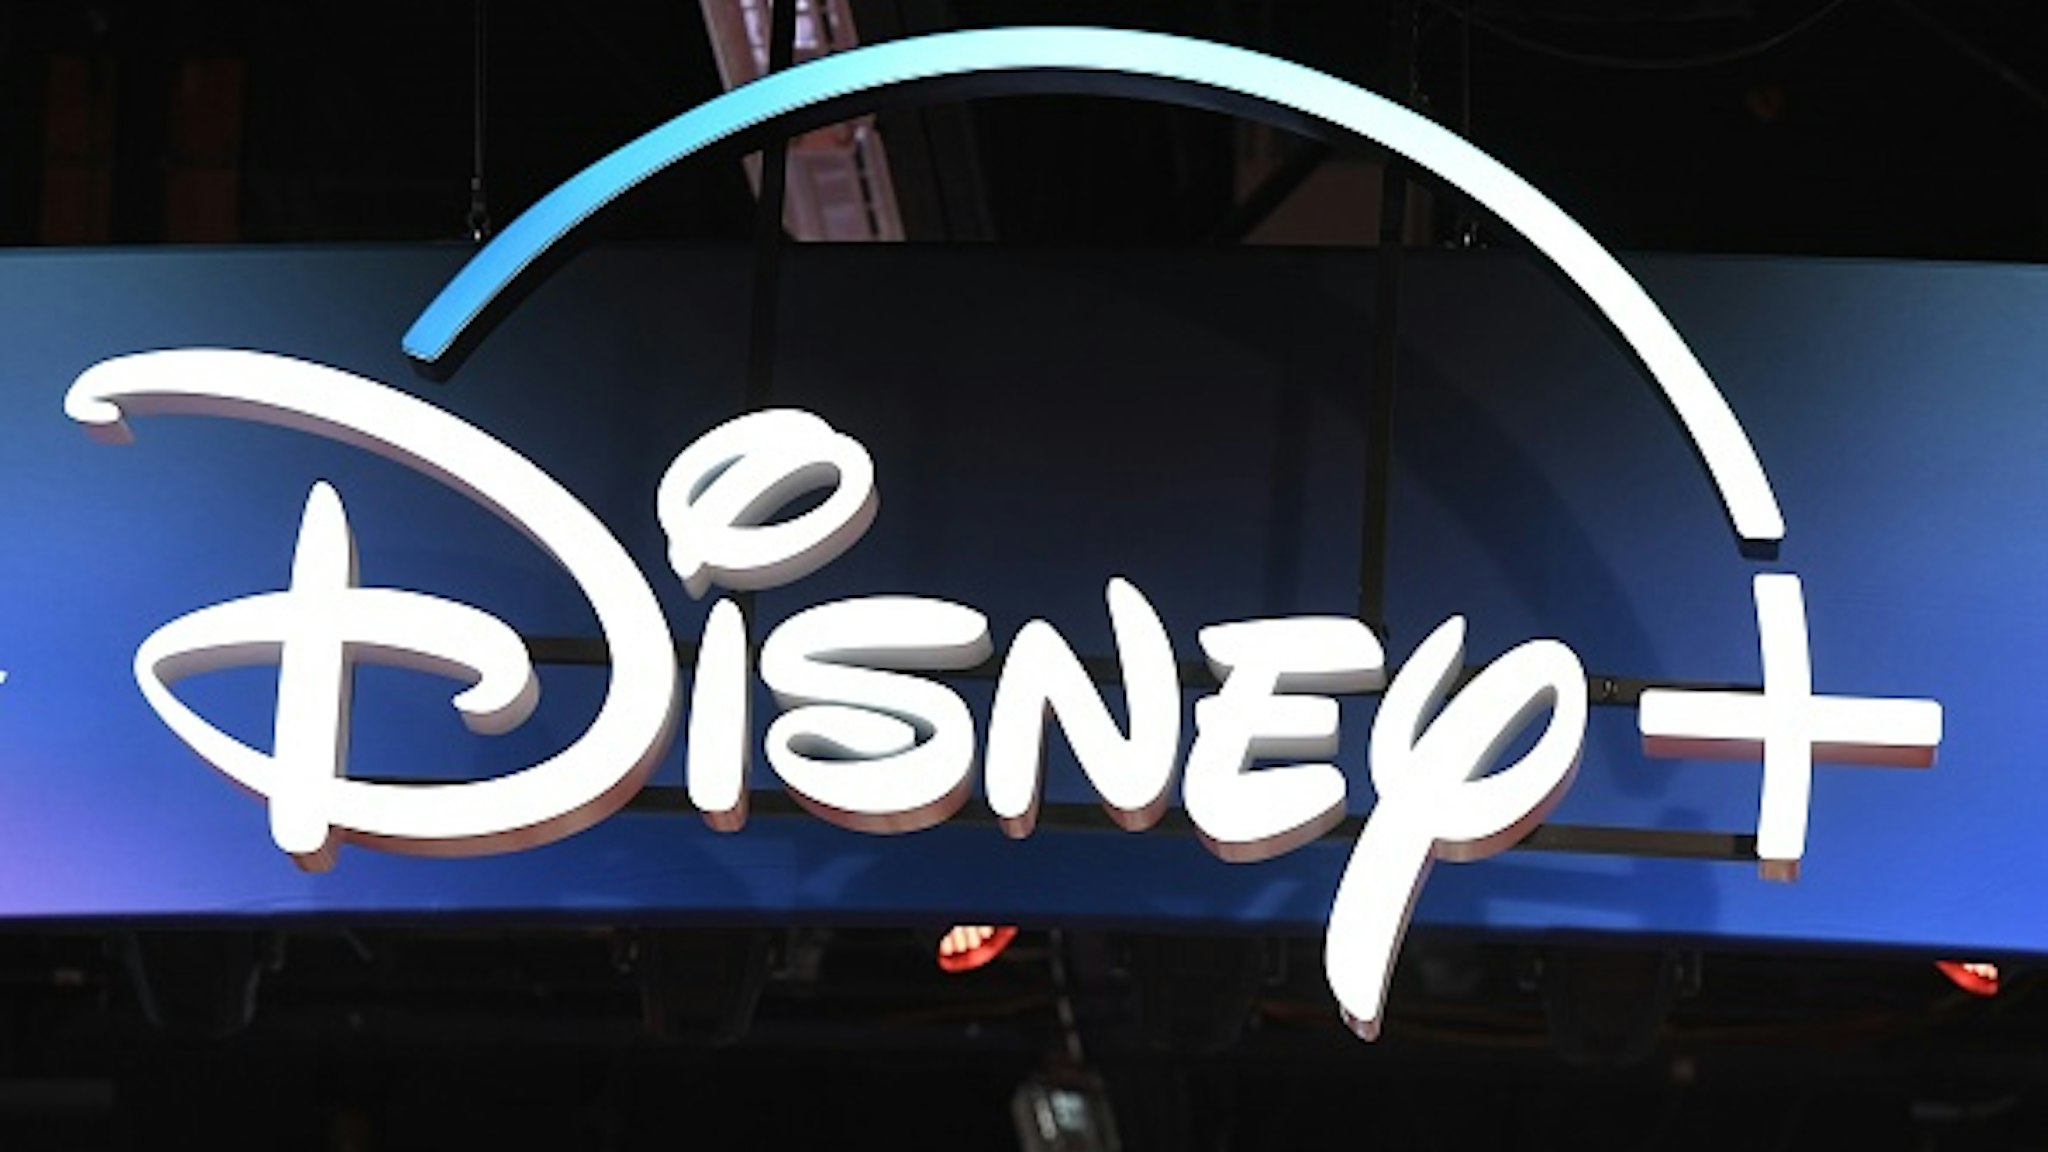 A Disney+ streaming service sign is pictured at the D23 Expo, billed as the "largest Disney fan event in the world," on August 23, 2019 at the Anaheim Convention Center in Anaheim, California. - Disney Plus will launch on November 12 and will compete with out streaming services such as Netflix, Amazon, HBO Now and soon Apple TV Plus.